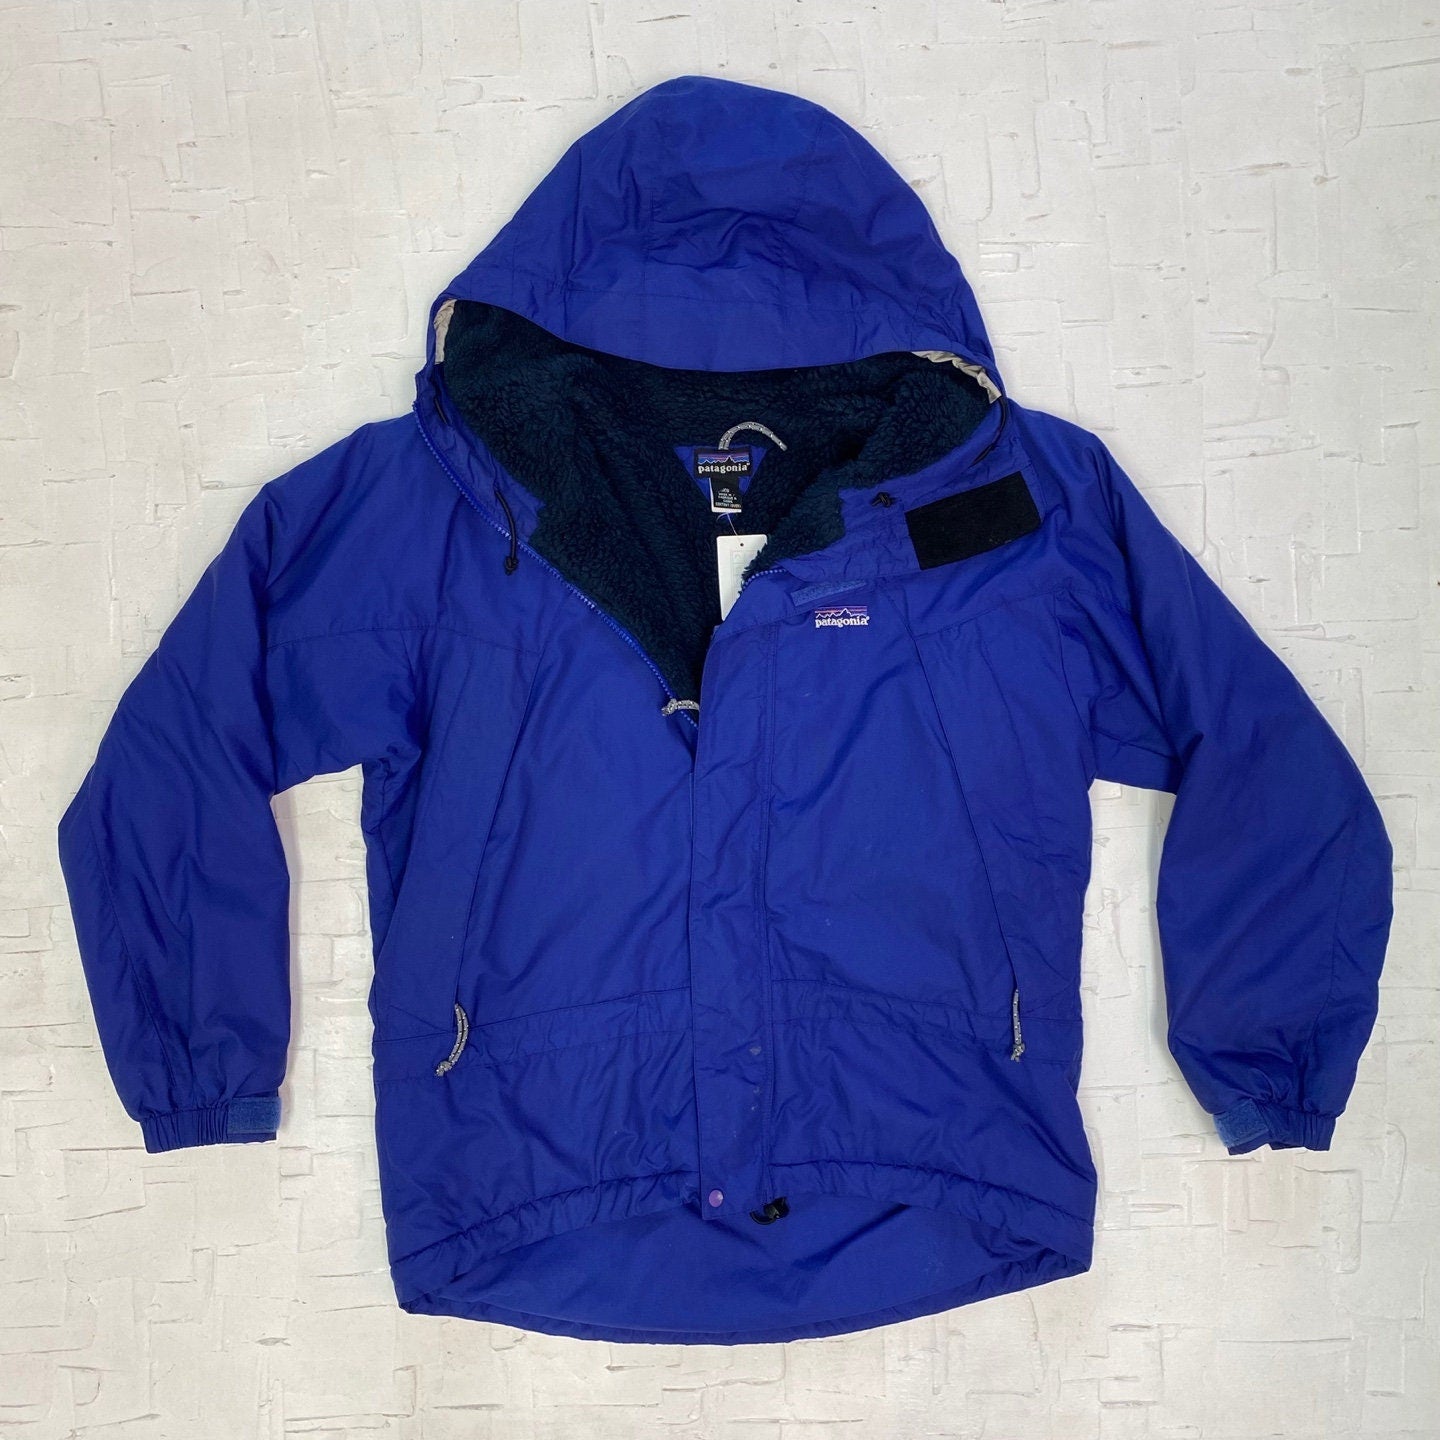 Vintage Patagonia Puffer Jacket with Fleece Lining and Zip up + Velcro Closure | Vintage Puffer Jacket | Patagonia | Size XS | SKU M-1962